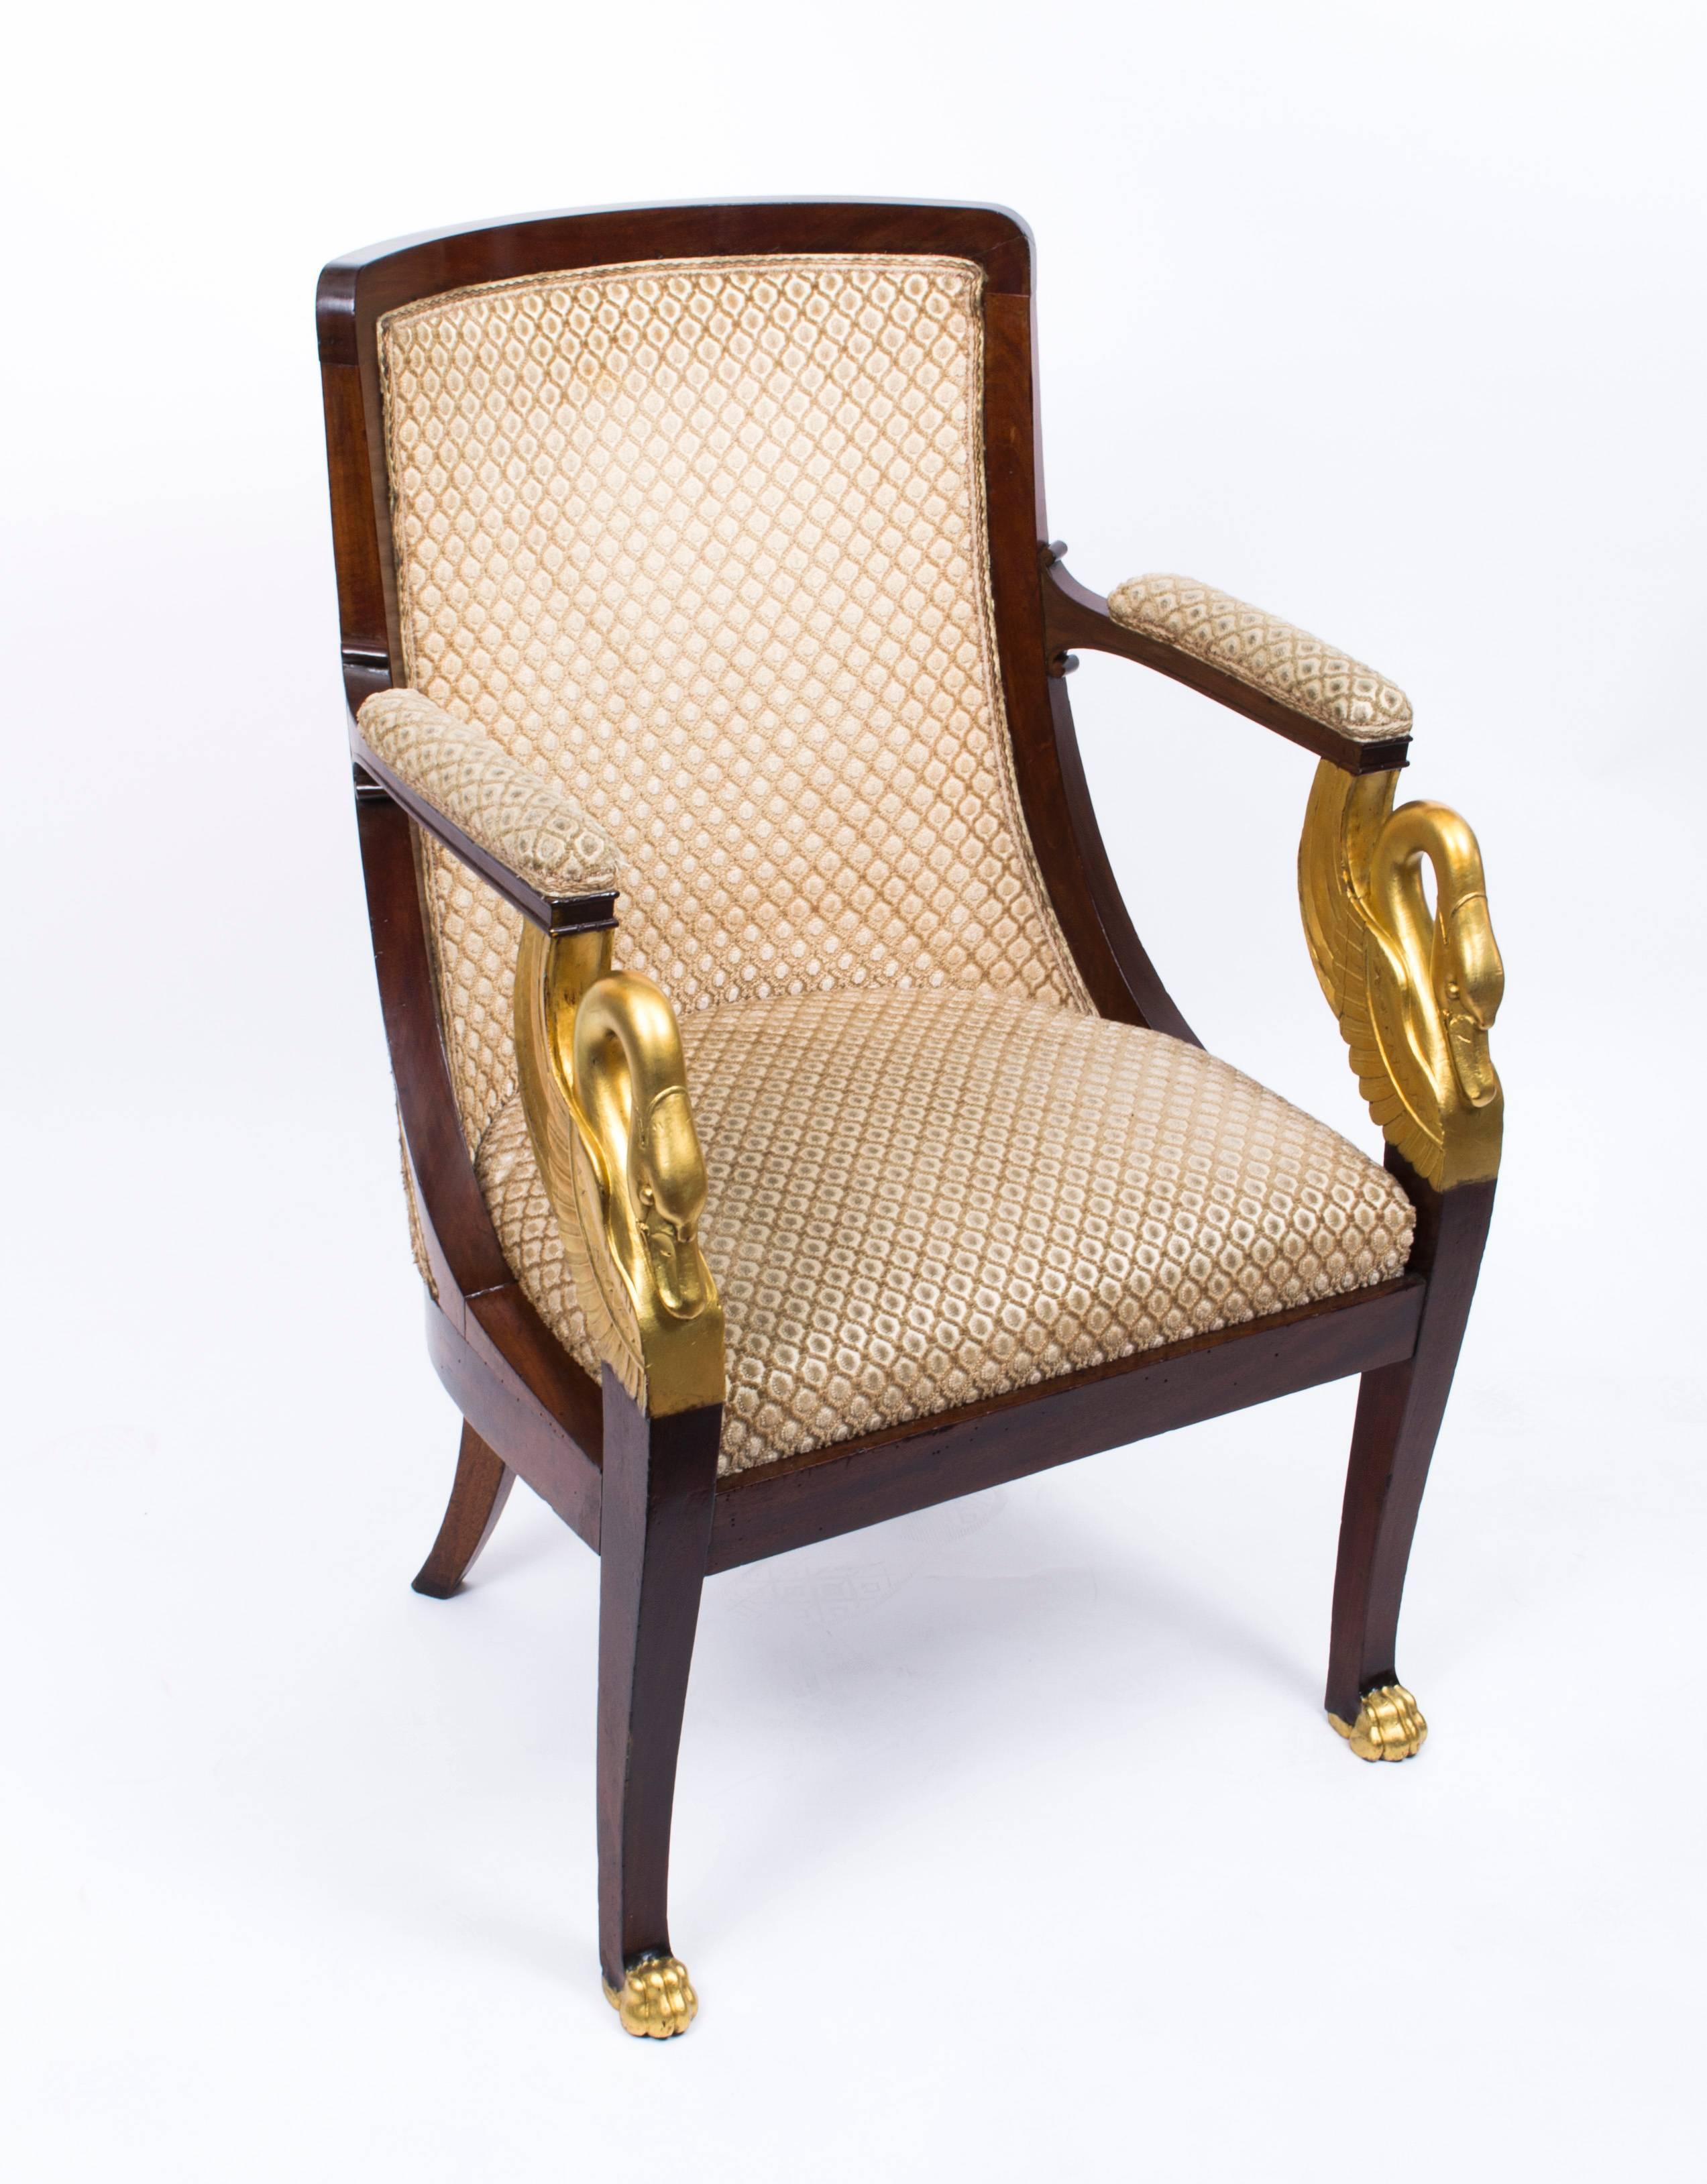 This is a beautiful pair of hand-carved and gilded solid mahogany French Empire armchairs circa 1820 in date.

They have beautifully carved and gilded swan neck decoration and front legs that terminate in decorative gilded paw feet.

They are